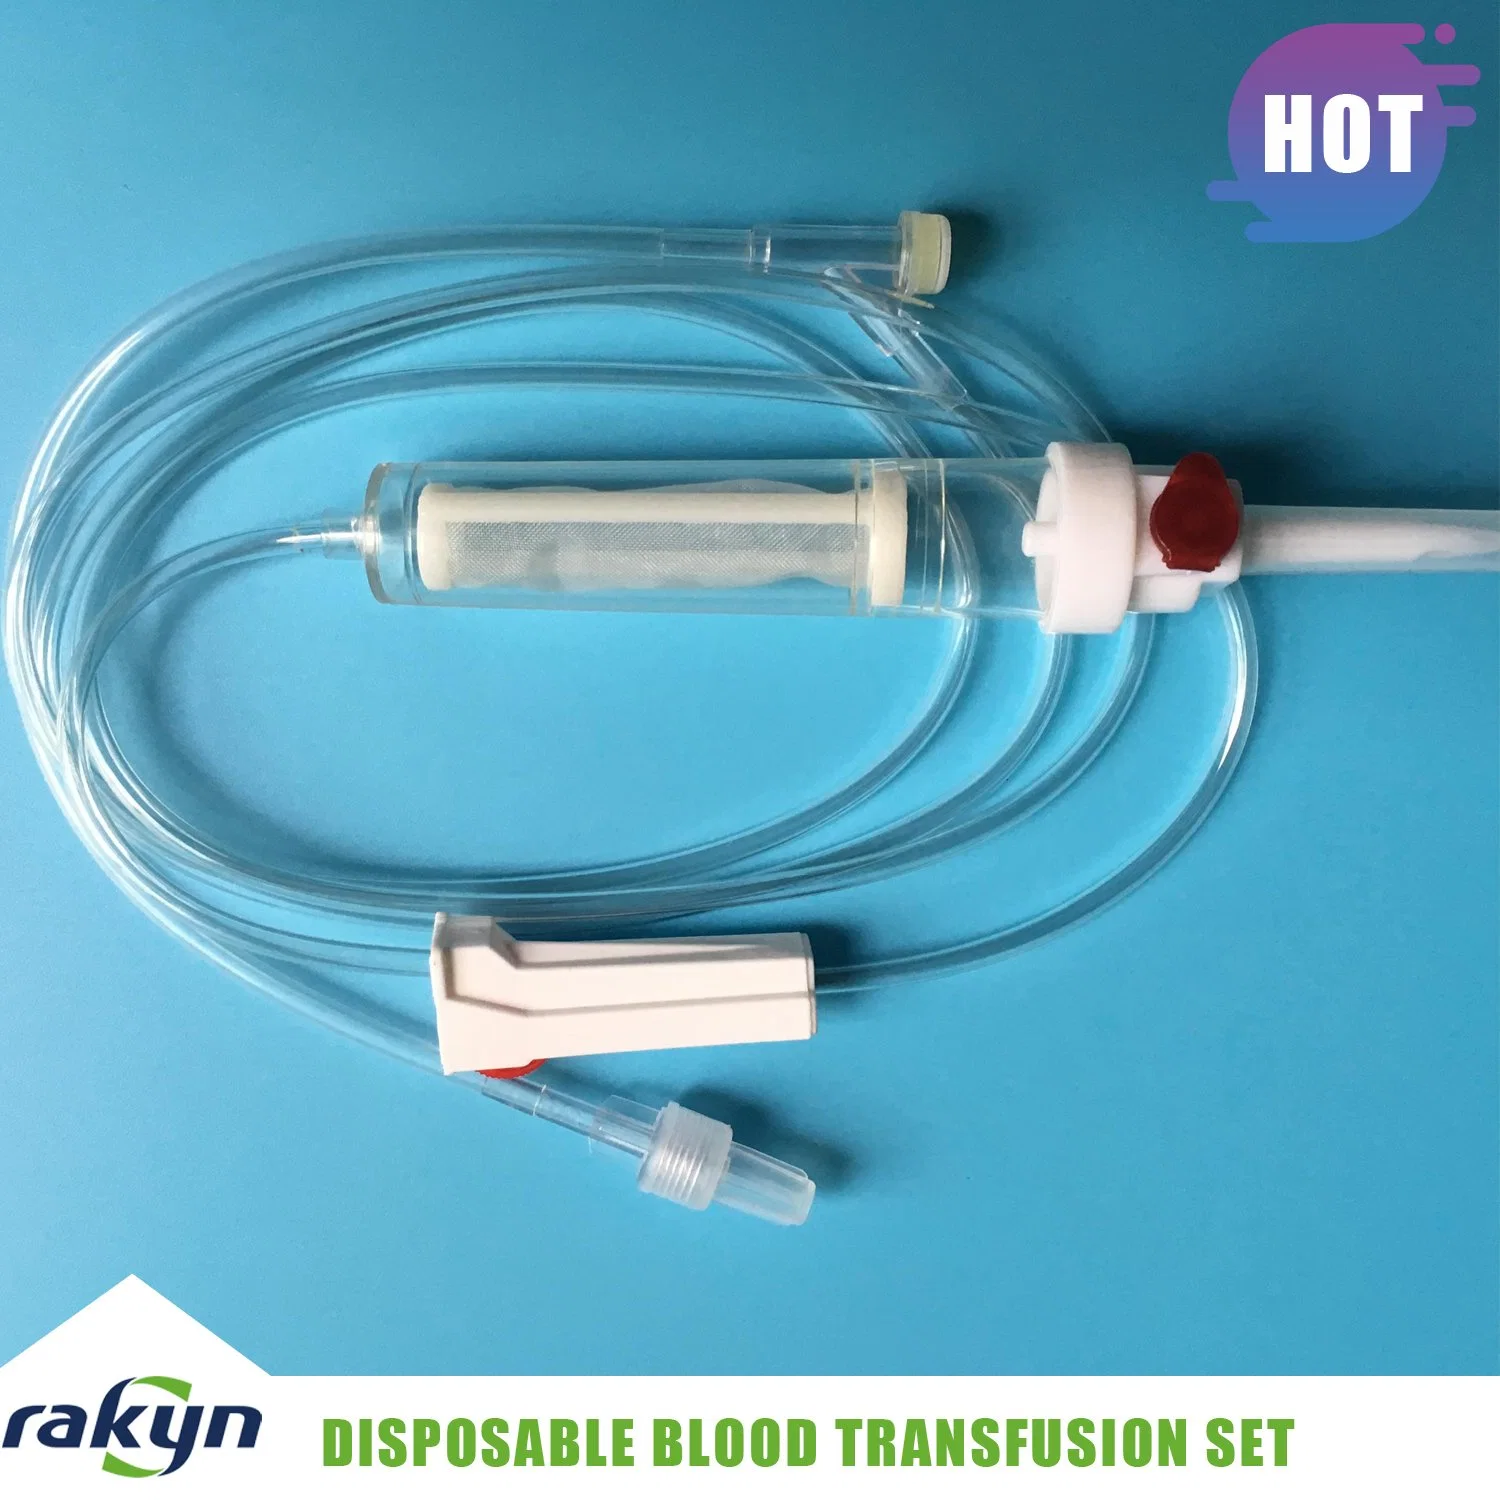 Medical Instrument of Disposable Blood Transfusion Set with Filter